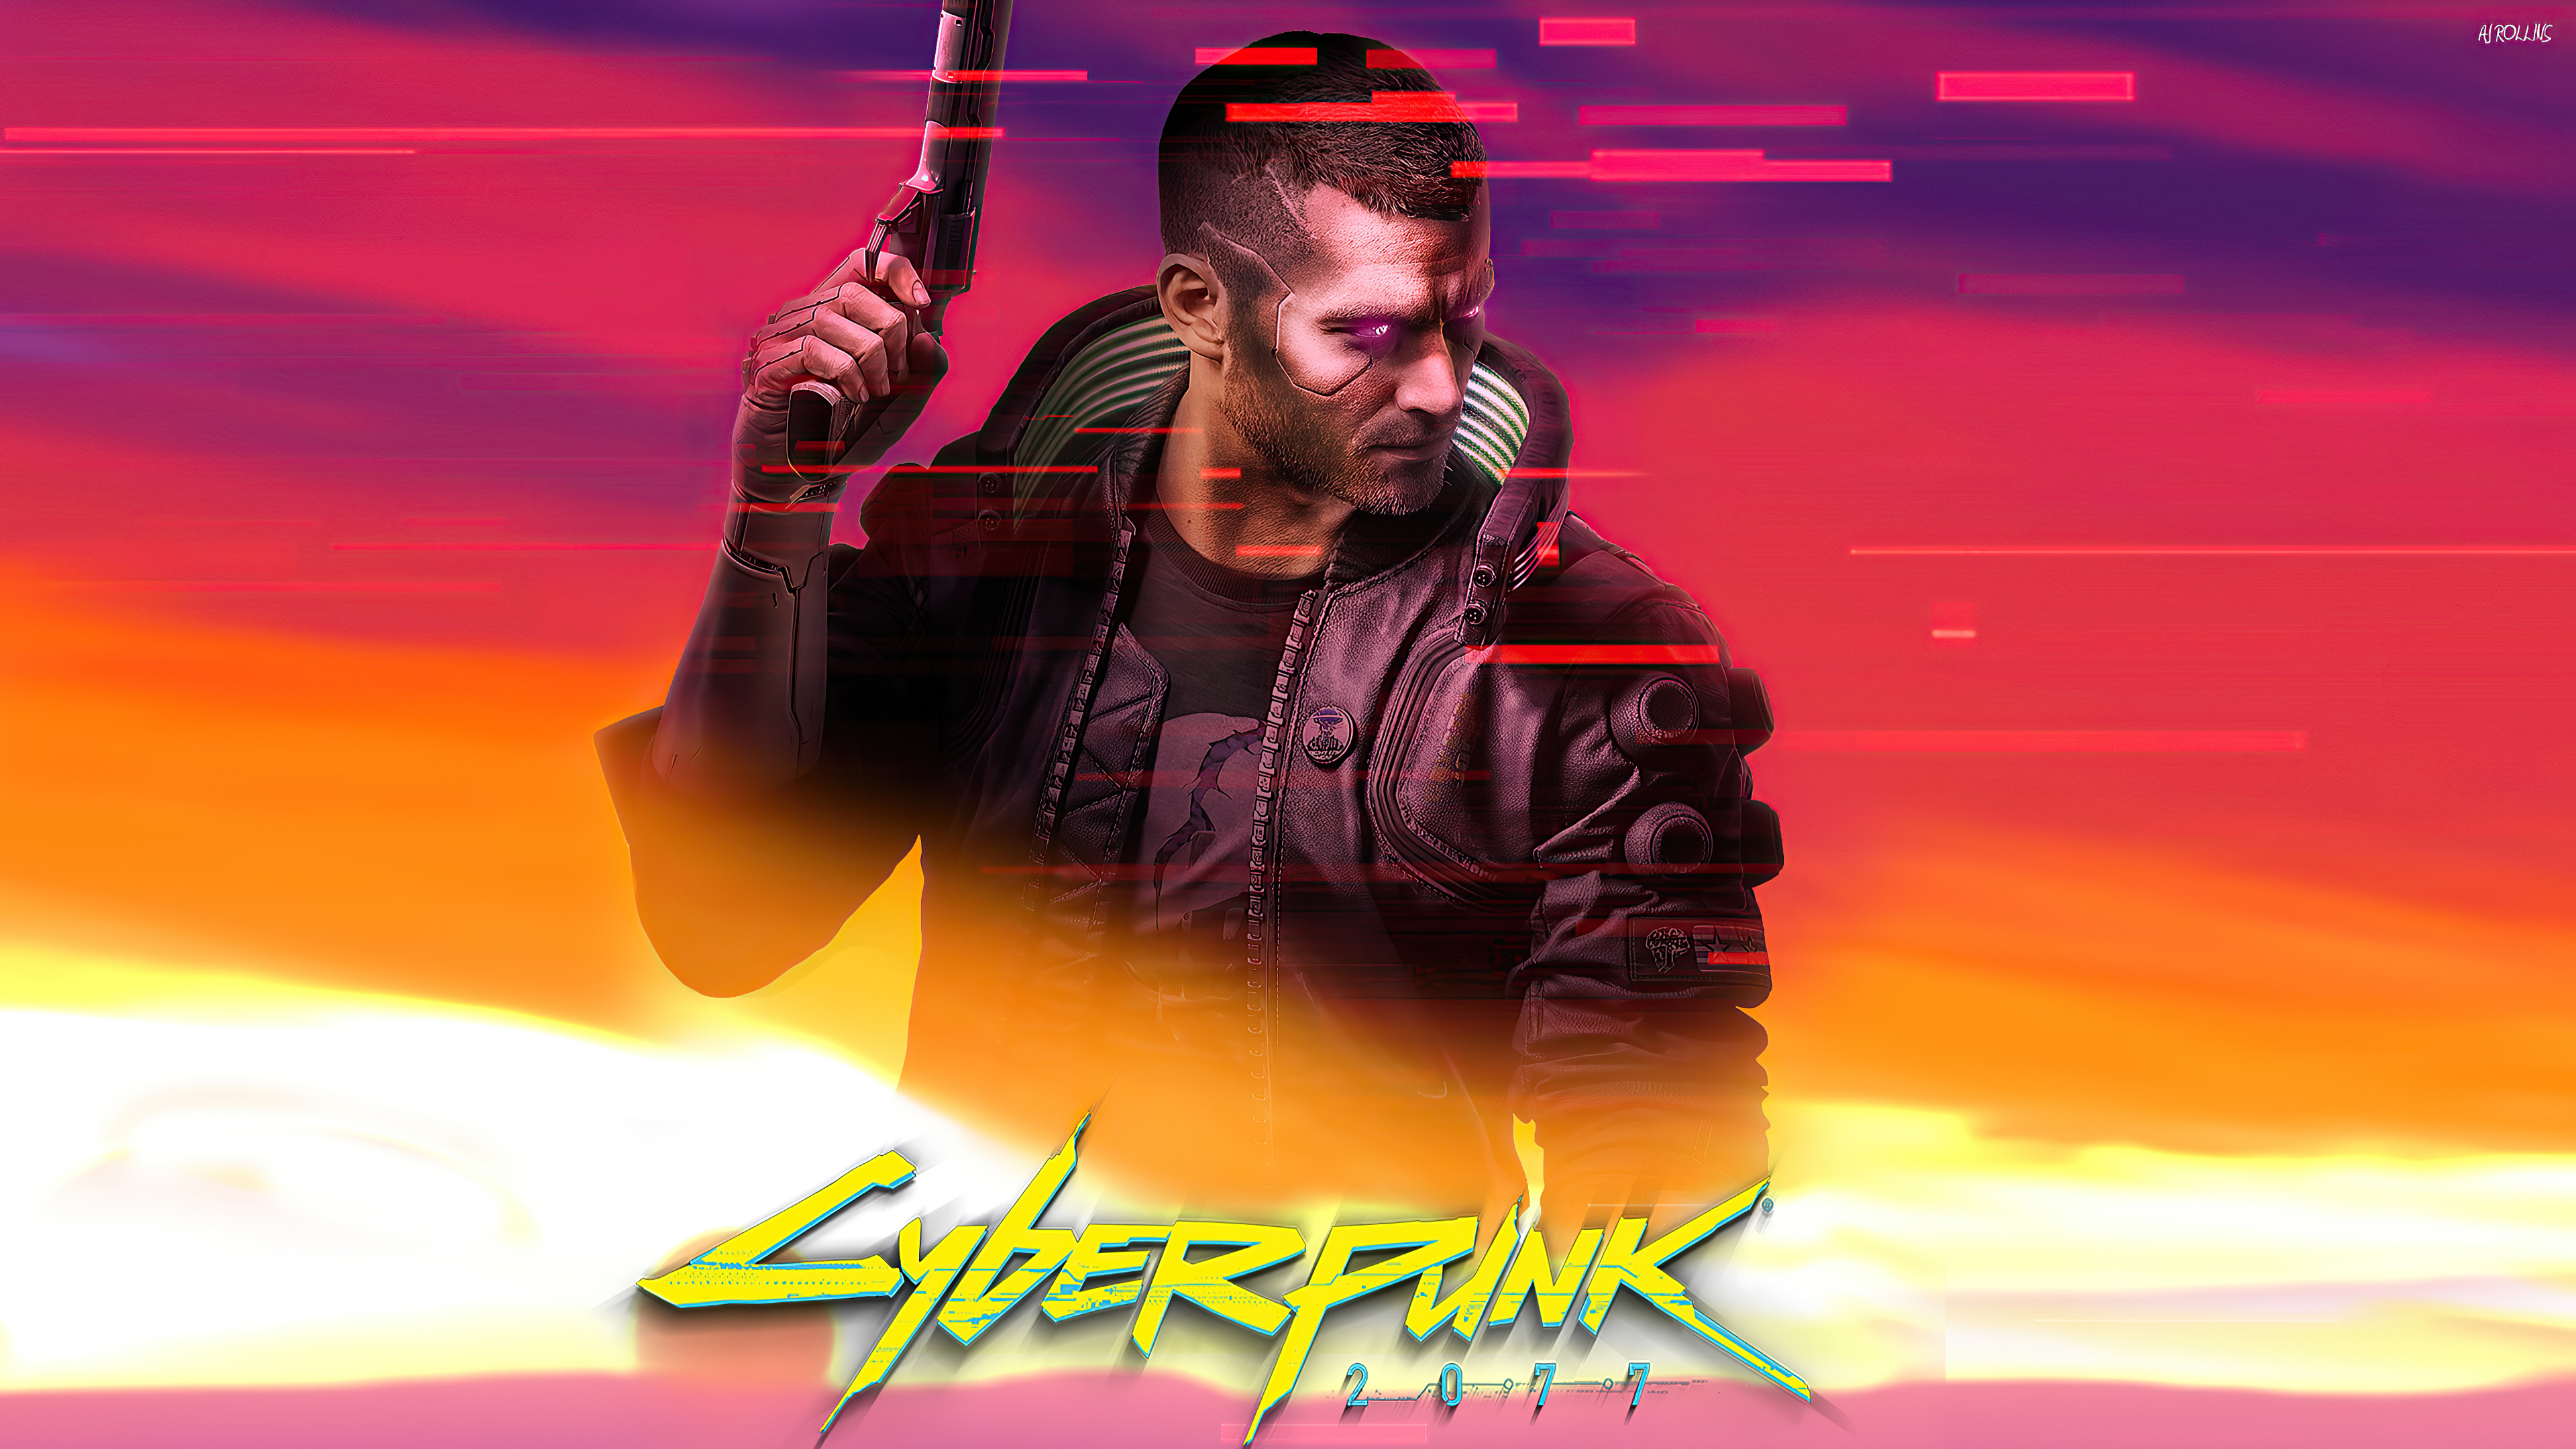 Cyberpunk 2077 Fan Art 4k Wallpaper,HD Games Wallpapers,4k Wallpapers ,Images,Backgrounds,Photos and Pictures